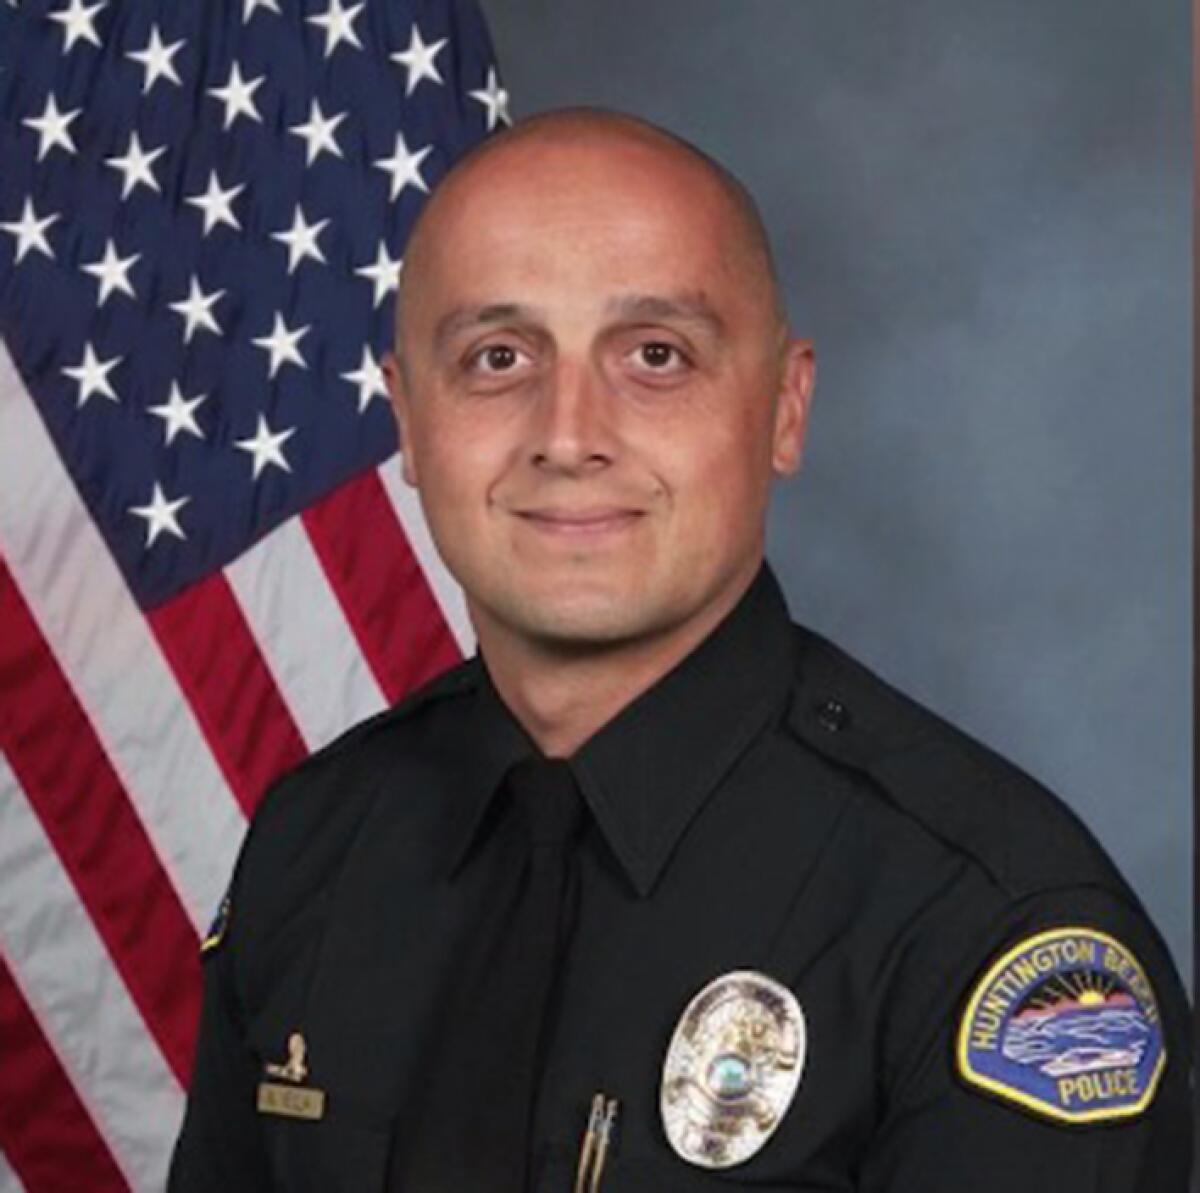 Huntington Beach Police Officer Nicholas Vella in uniform in front of a U.S. flag.